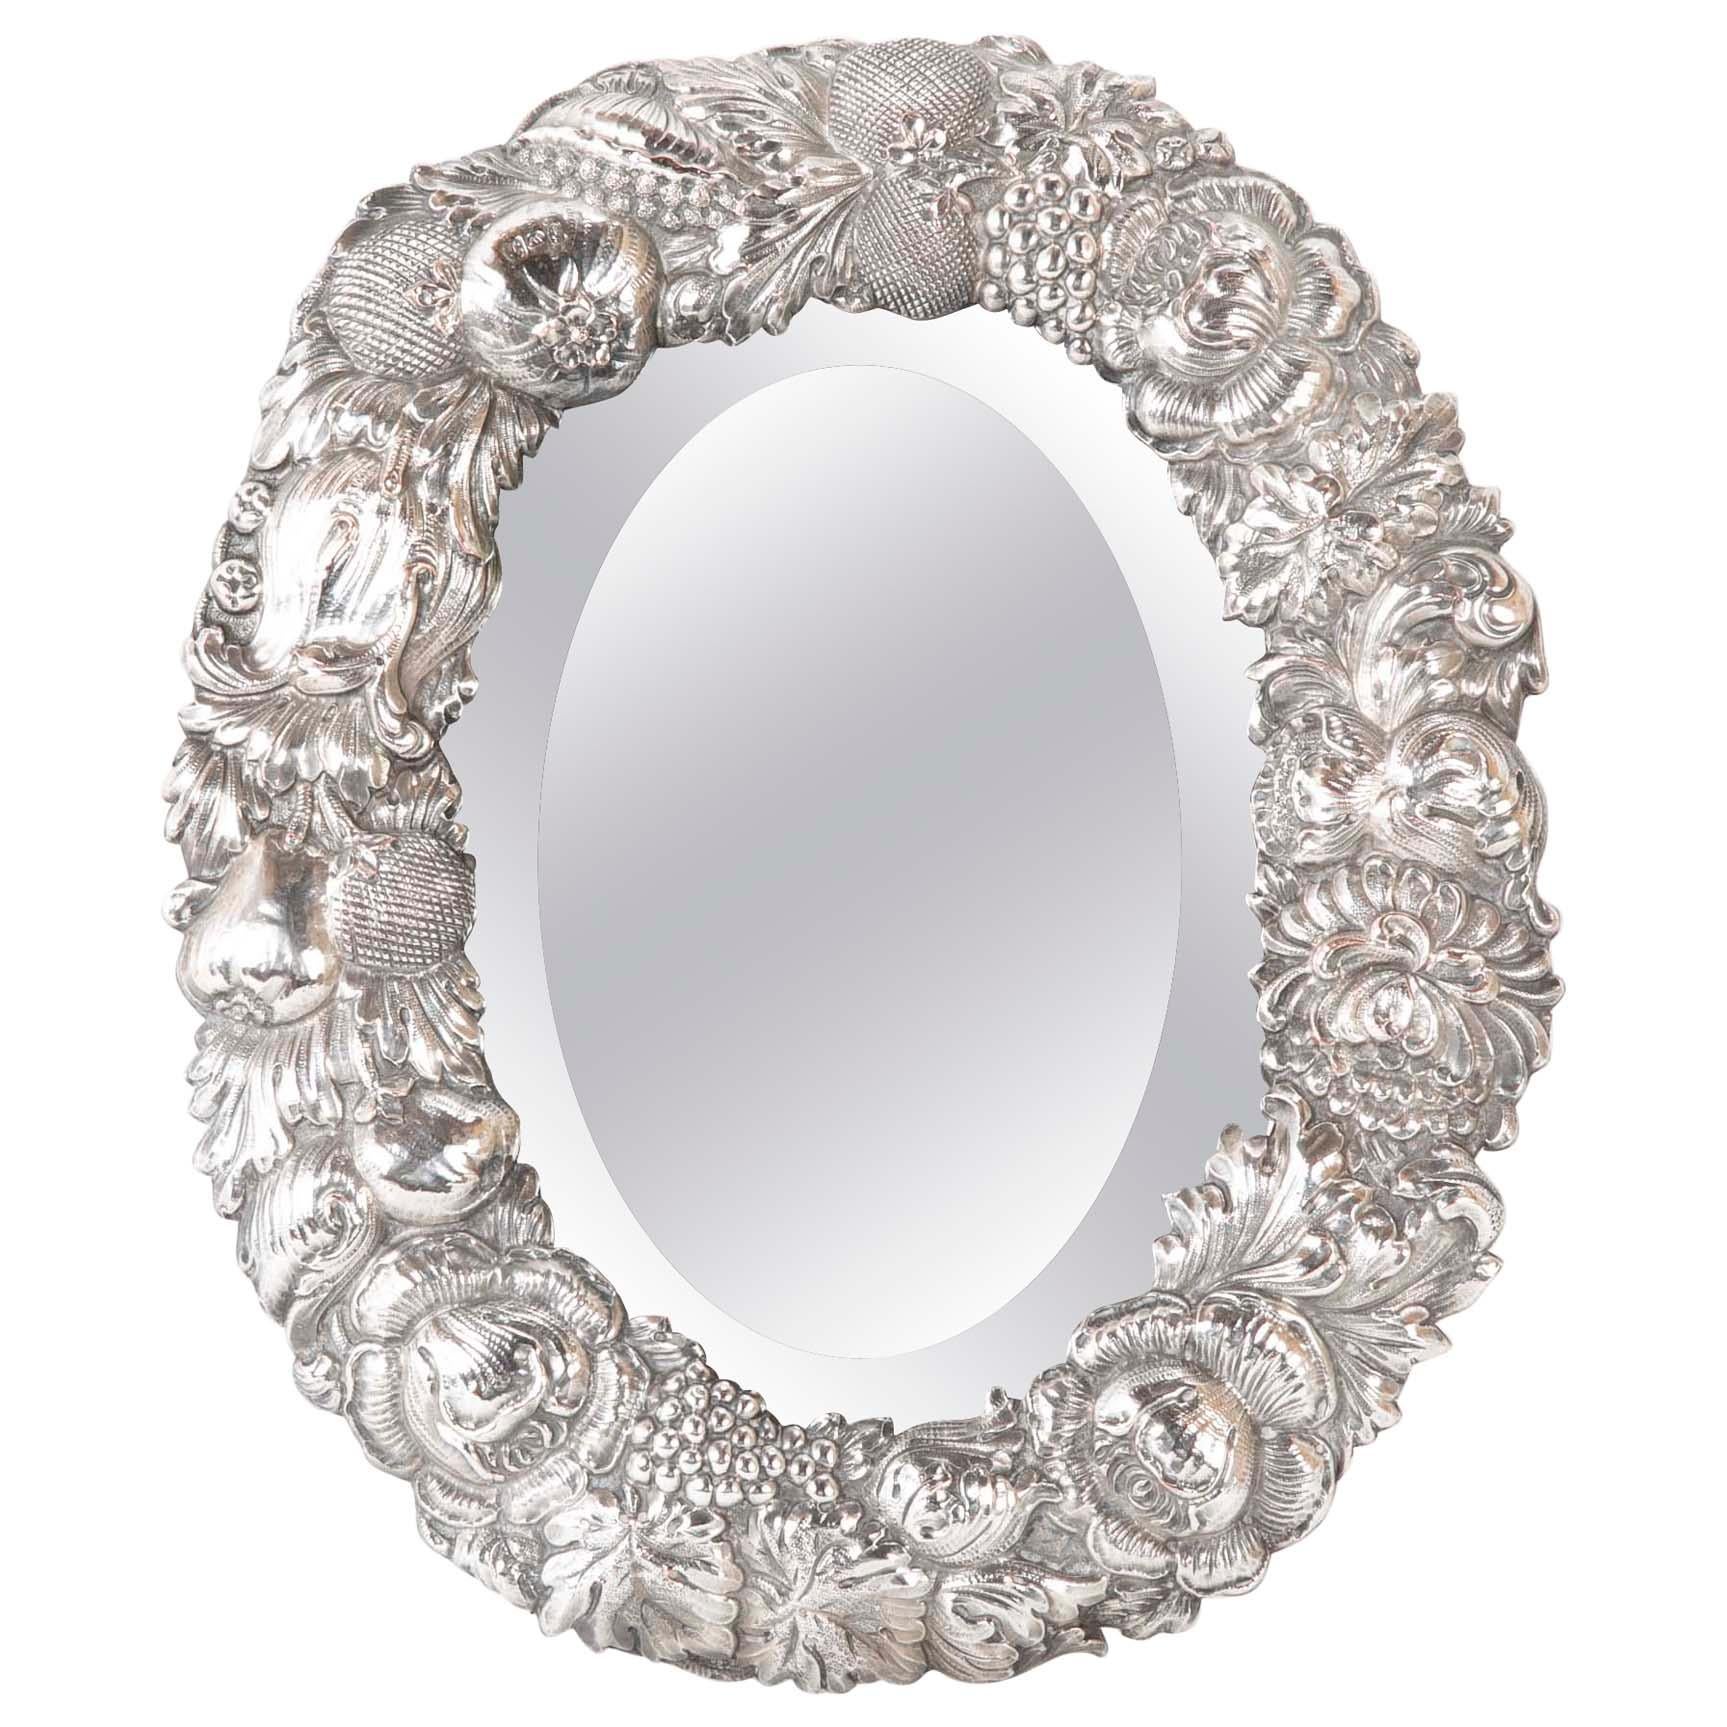 19th Century English Silver Plated Oval Table Mirror For Sale